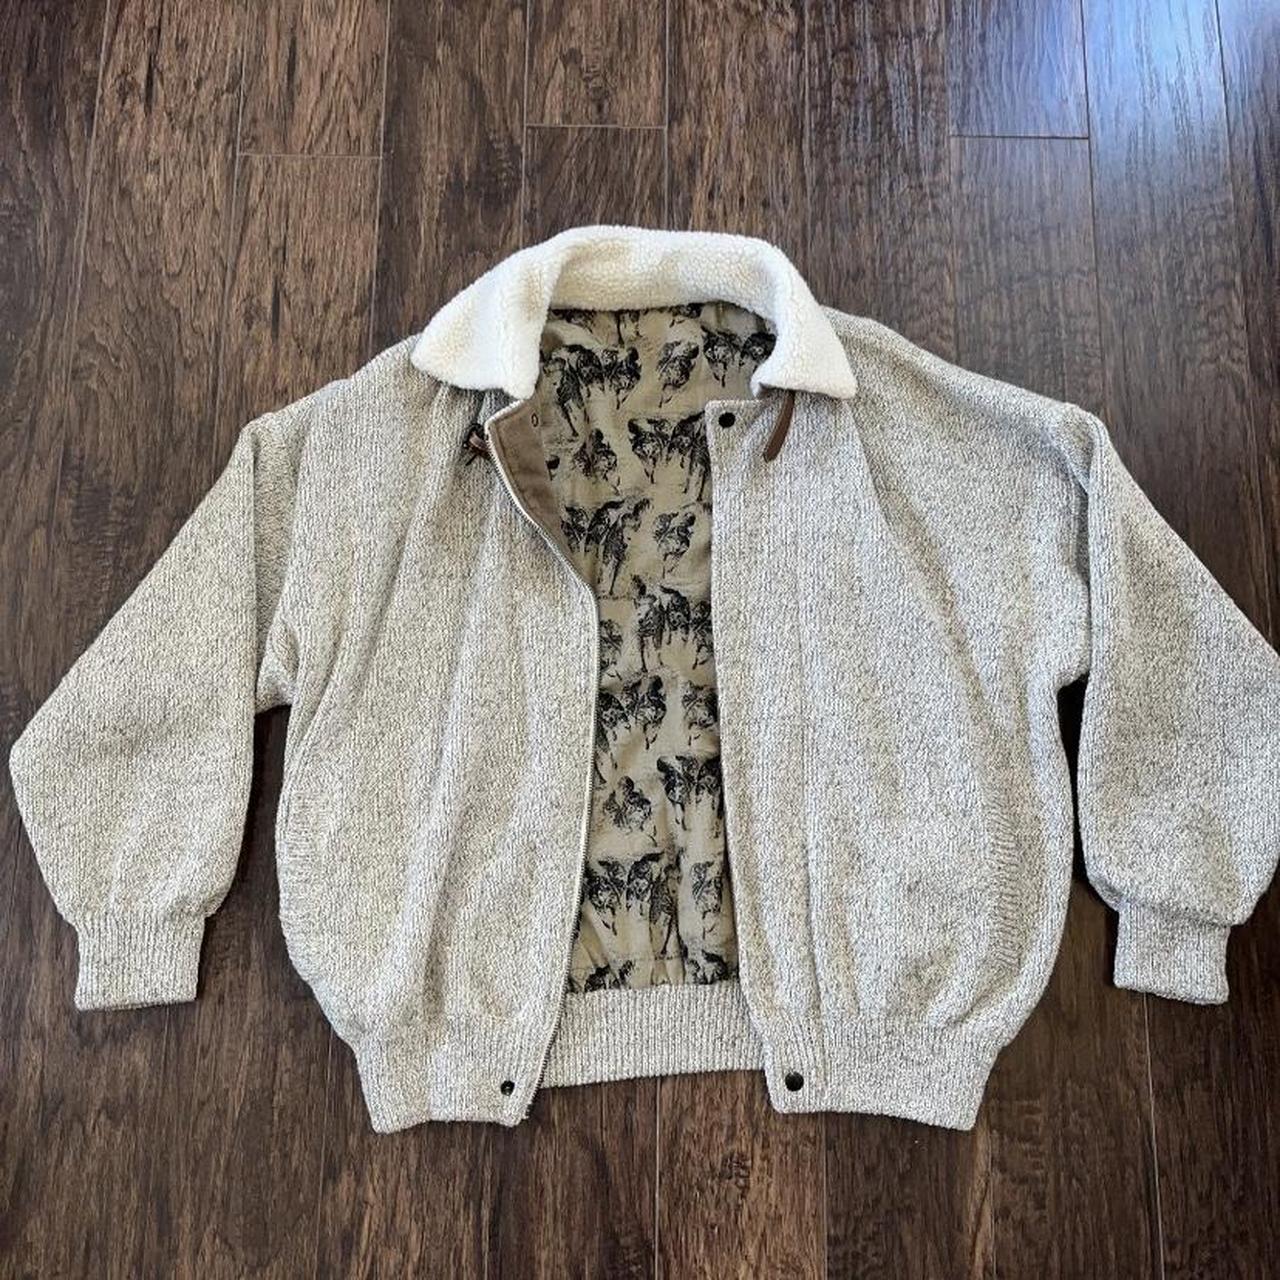 item listed by rchfinds